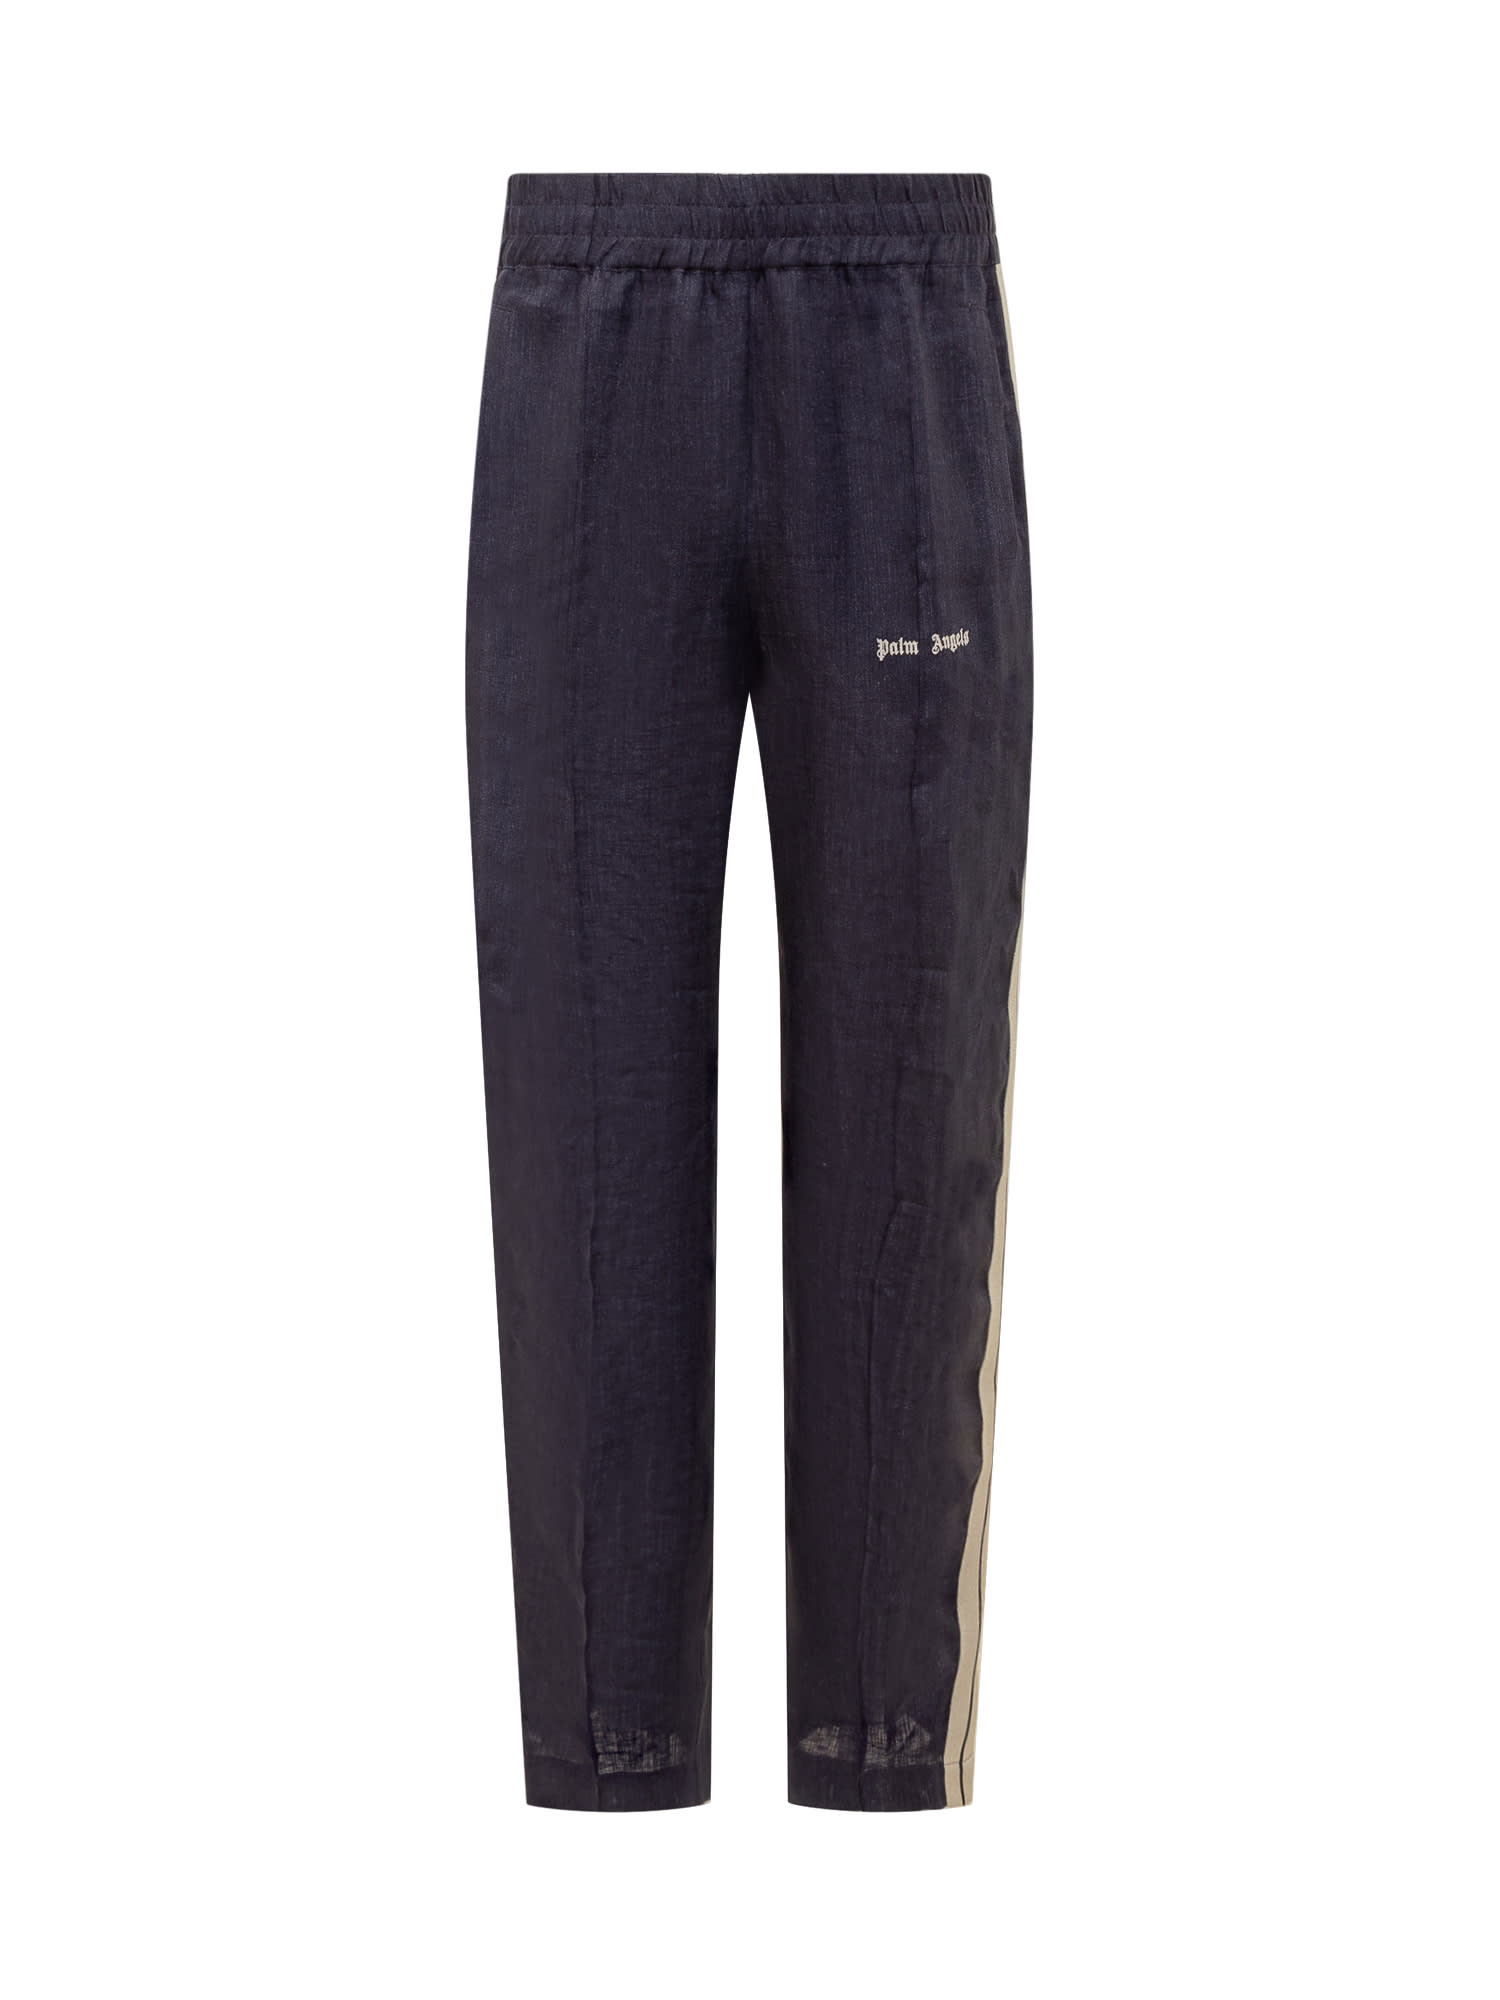 Palm Angels Linen Track Logo Trousers In Navy Blue